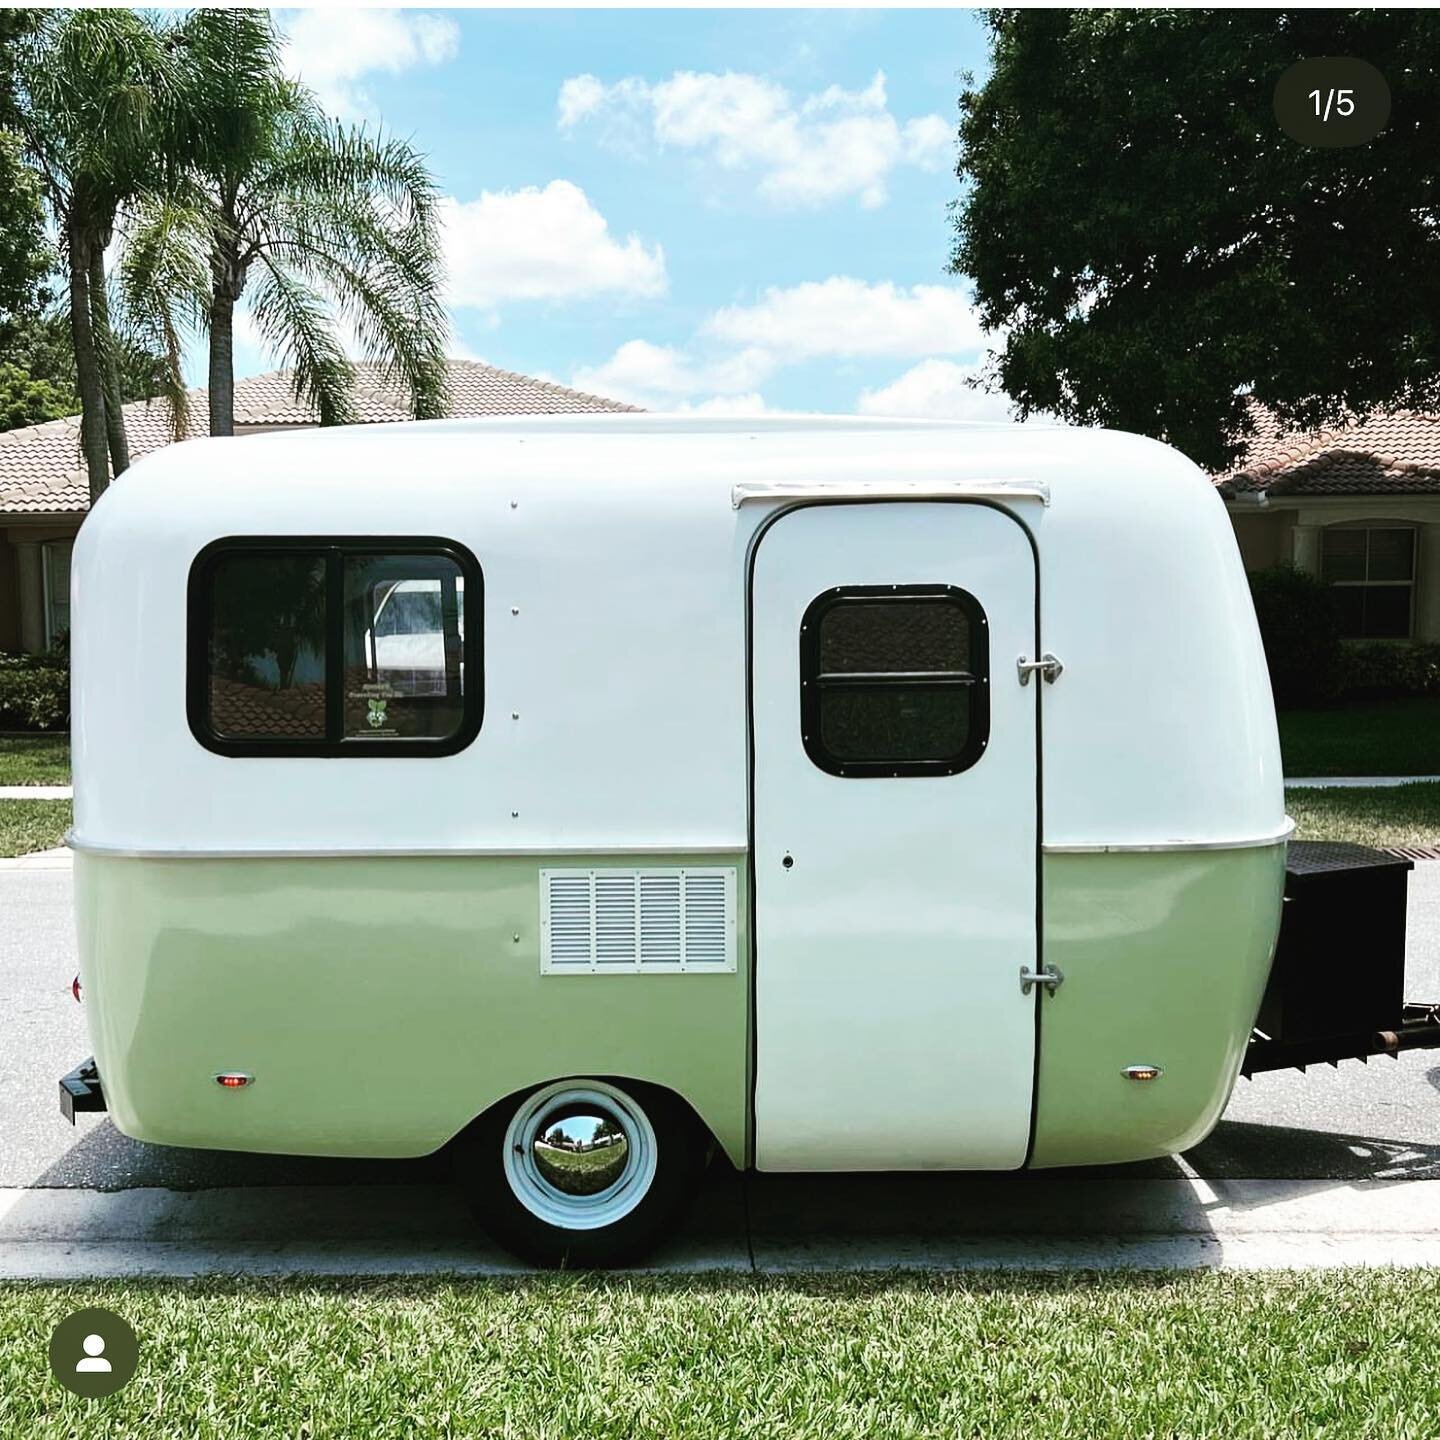 This adorable little traveling bug is coming to @theflamingoflea swipe to whats @sproutthescamp is all about? 

We love love new vendors specially when they come on 4 wheels. 

Shop @sproutthescamp May 28th at our next Flamingo Flea at @tarponriverbr